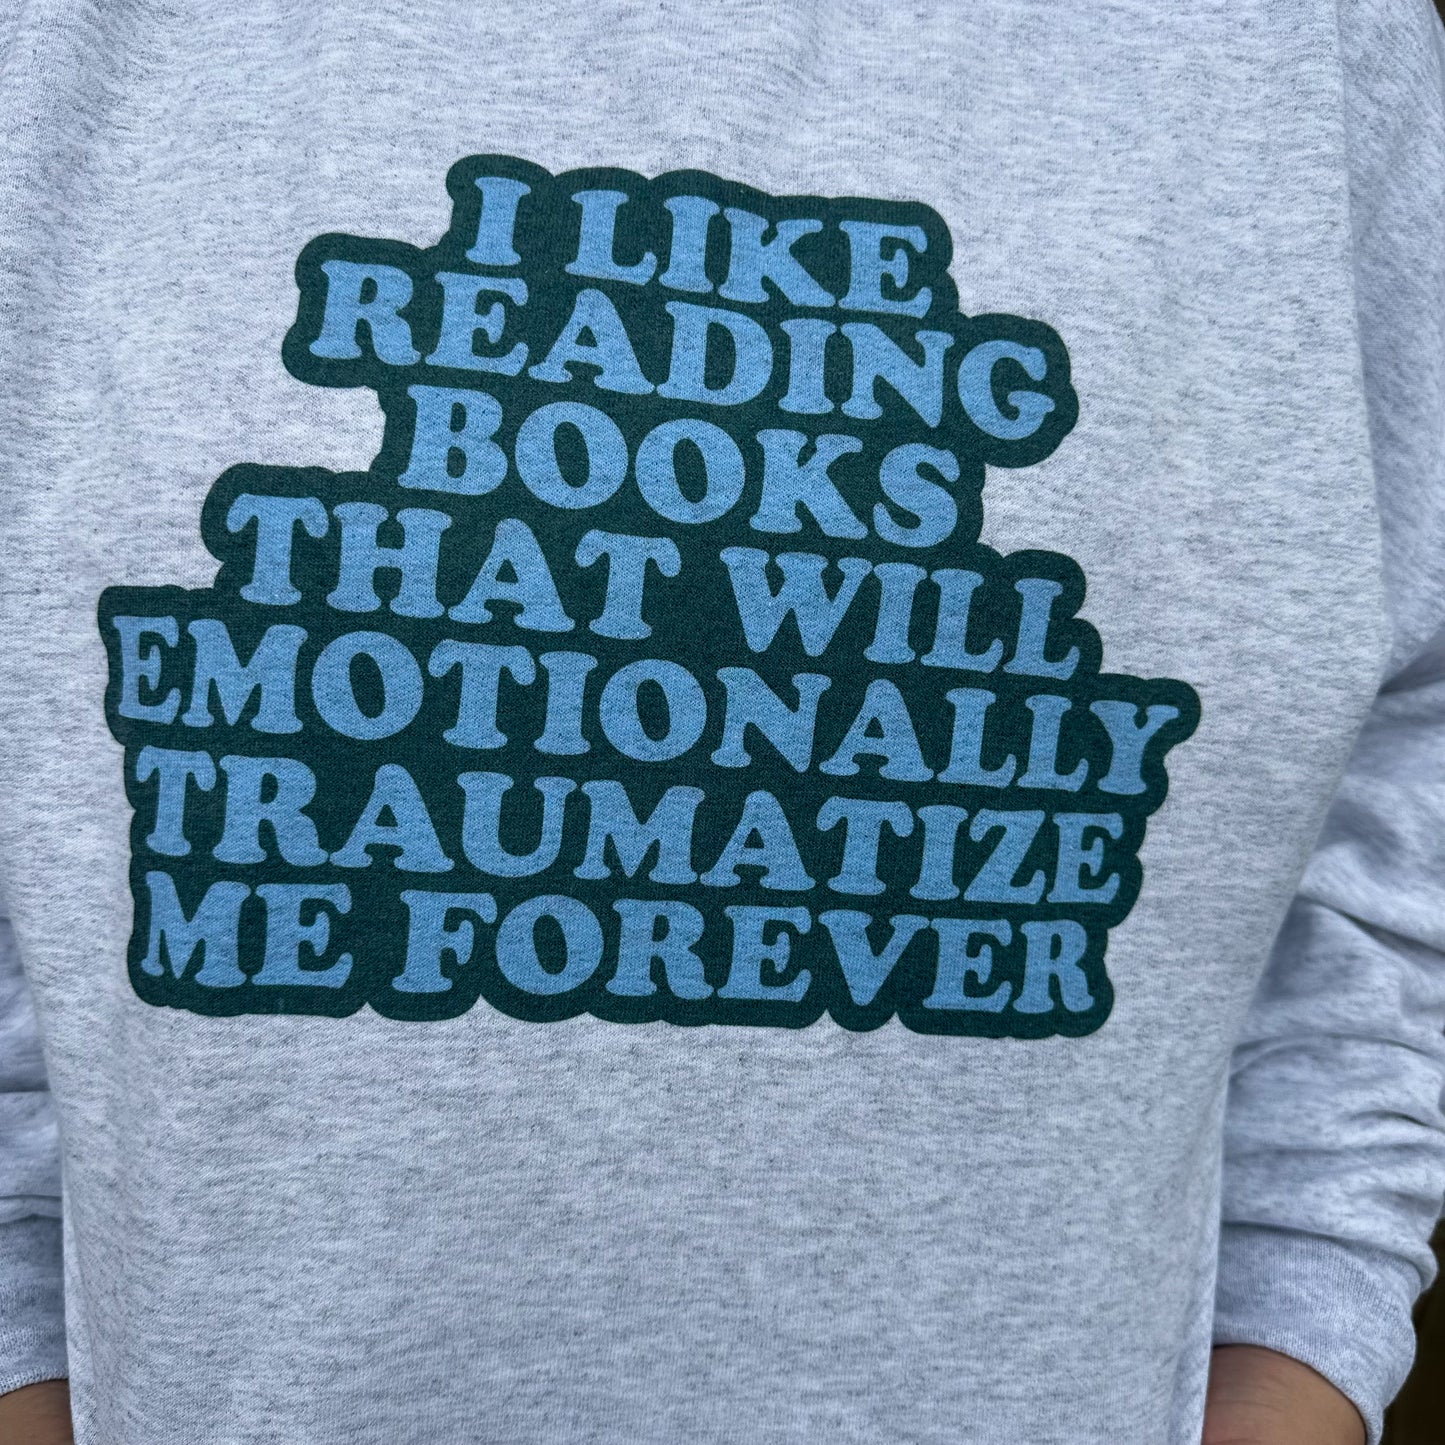 I Like Reading Books That Will Emotionally Traumatize Me Forever Pullover